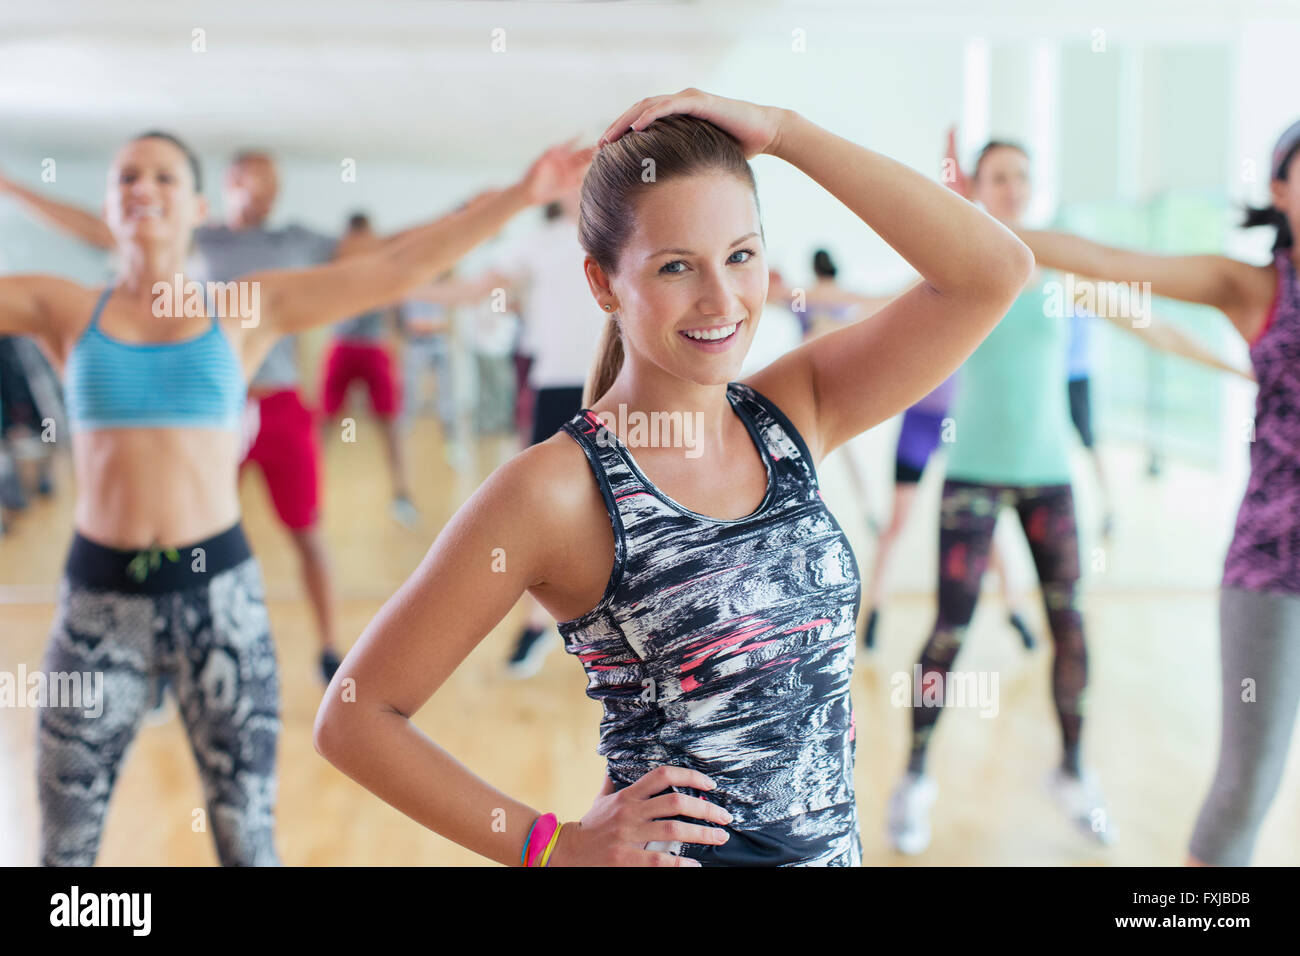 Portrait smiling woman in exercise class Stock Photo